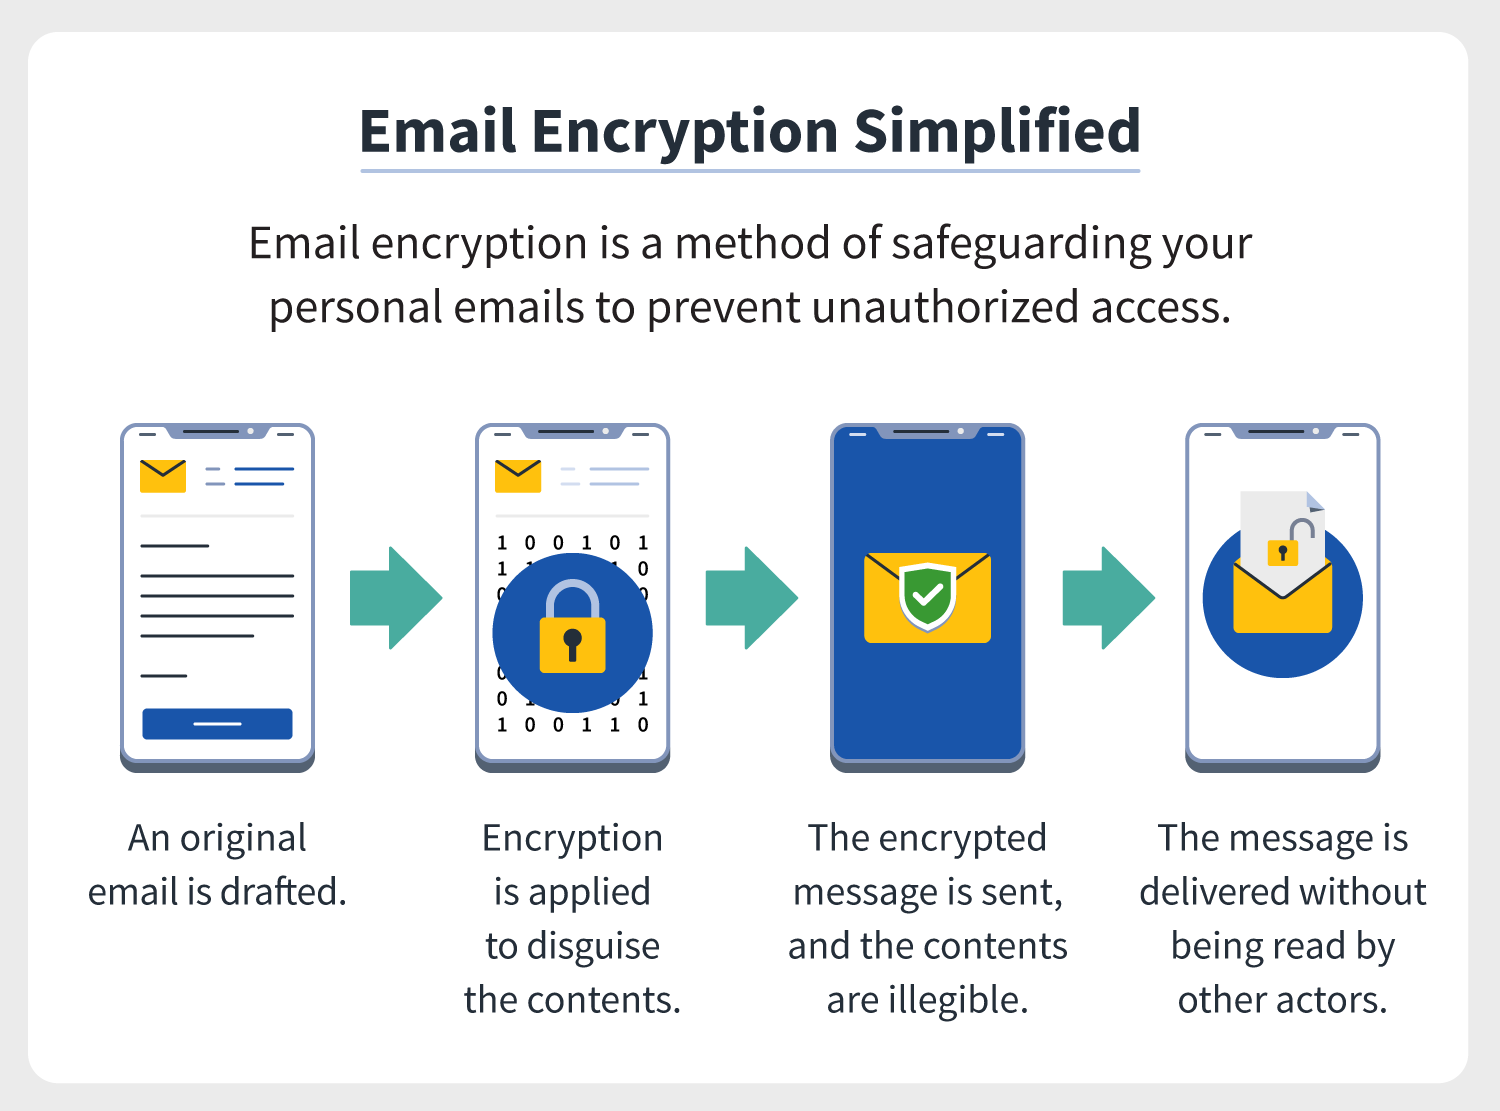 Email encryption simplified